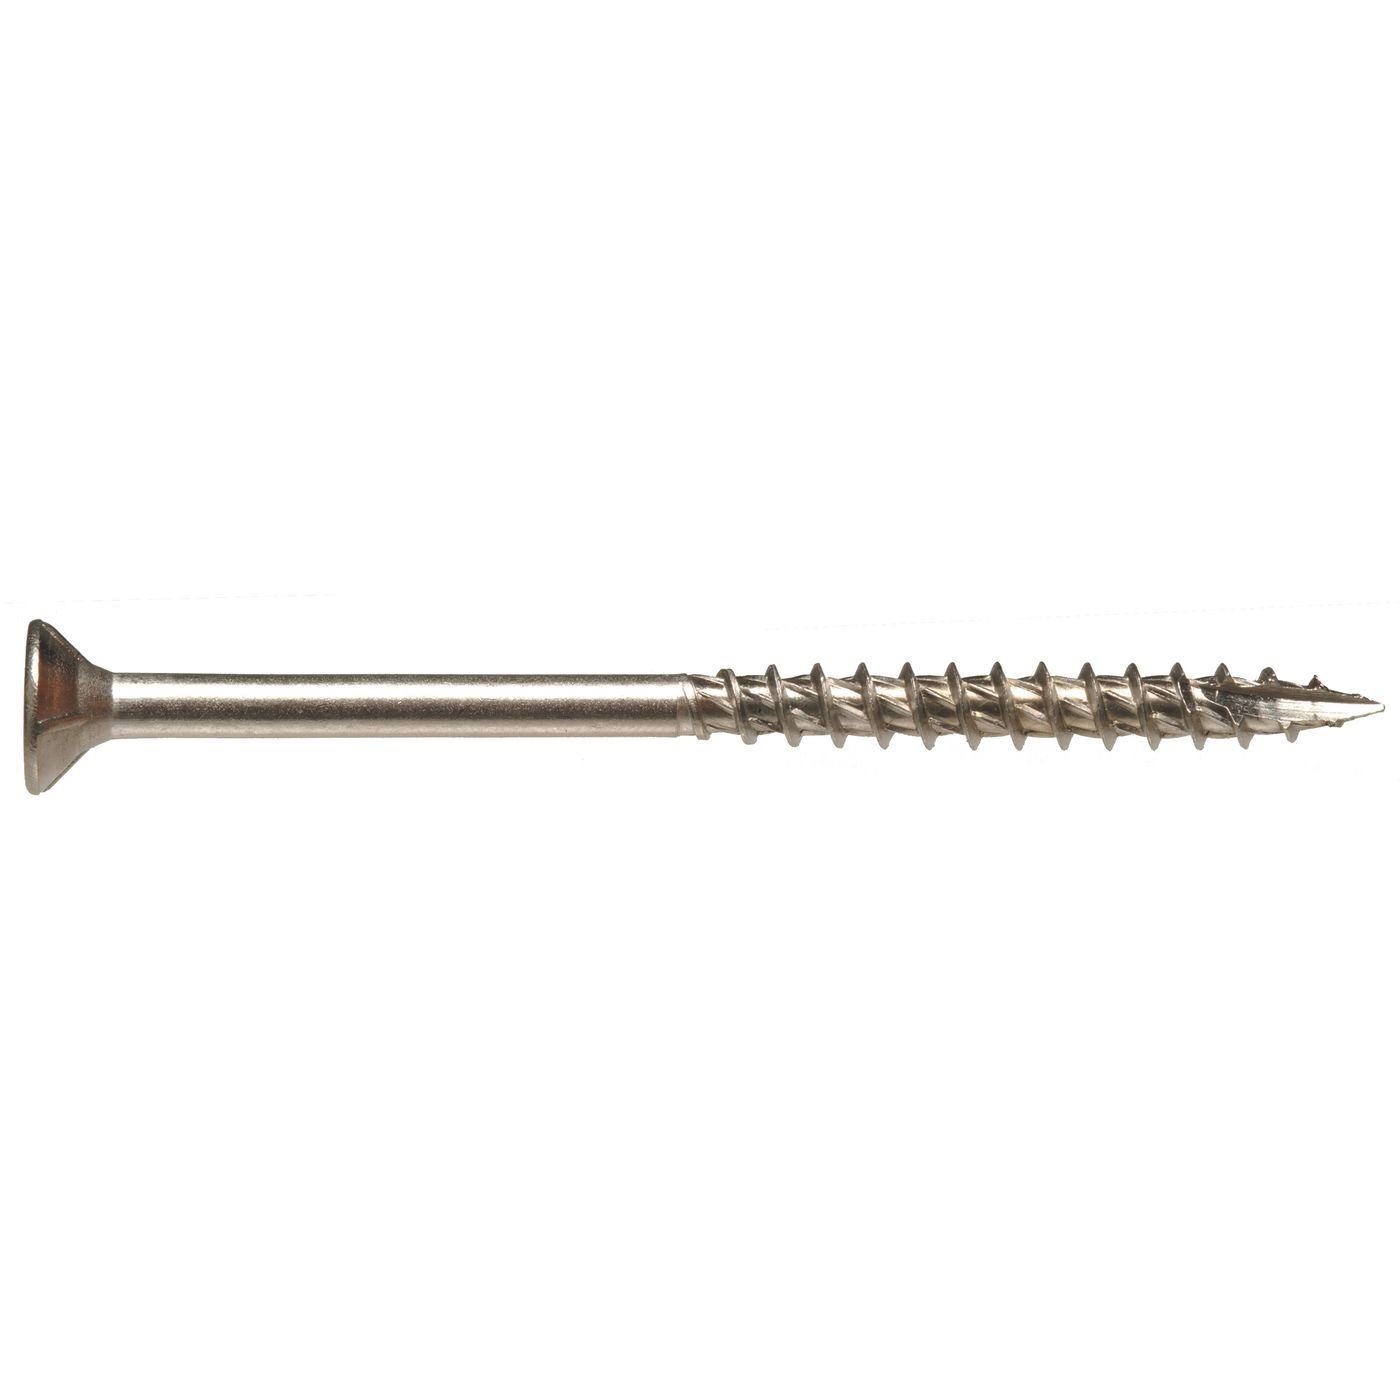 Square Drive Head 65 per Package Fastap Tech7 SS134SQ #8 x 1-3/4 Stainless Steel Self Drilling Wood Screws 